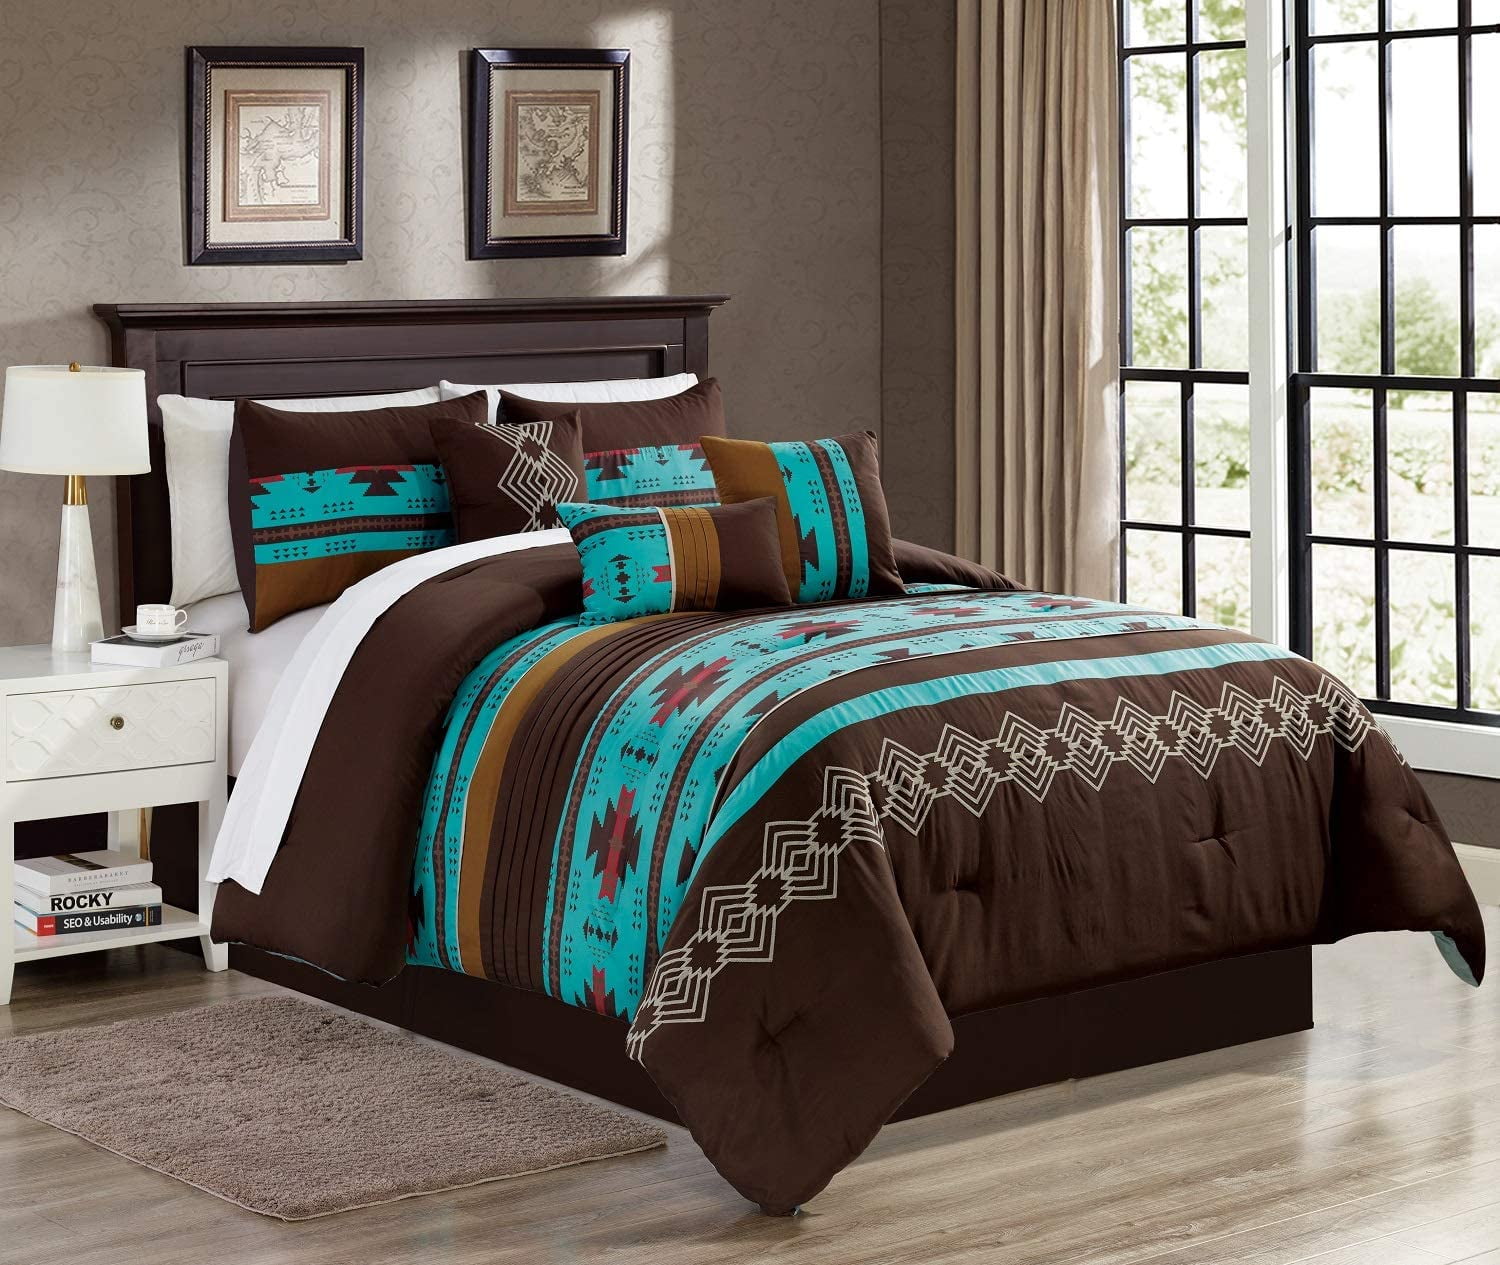 7 Pieces Set Details about   Embroidery Printed Texas Star Western Star Luxury Comforter Suede 